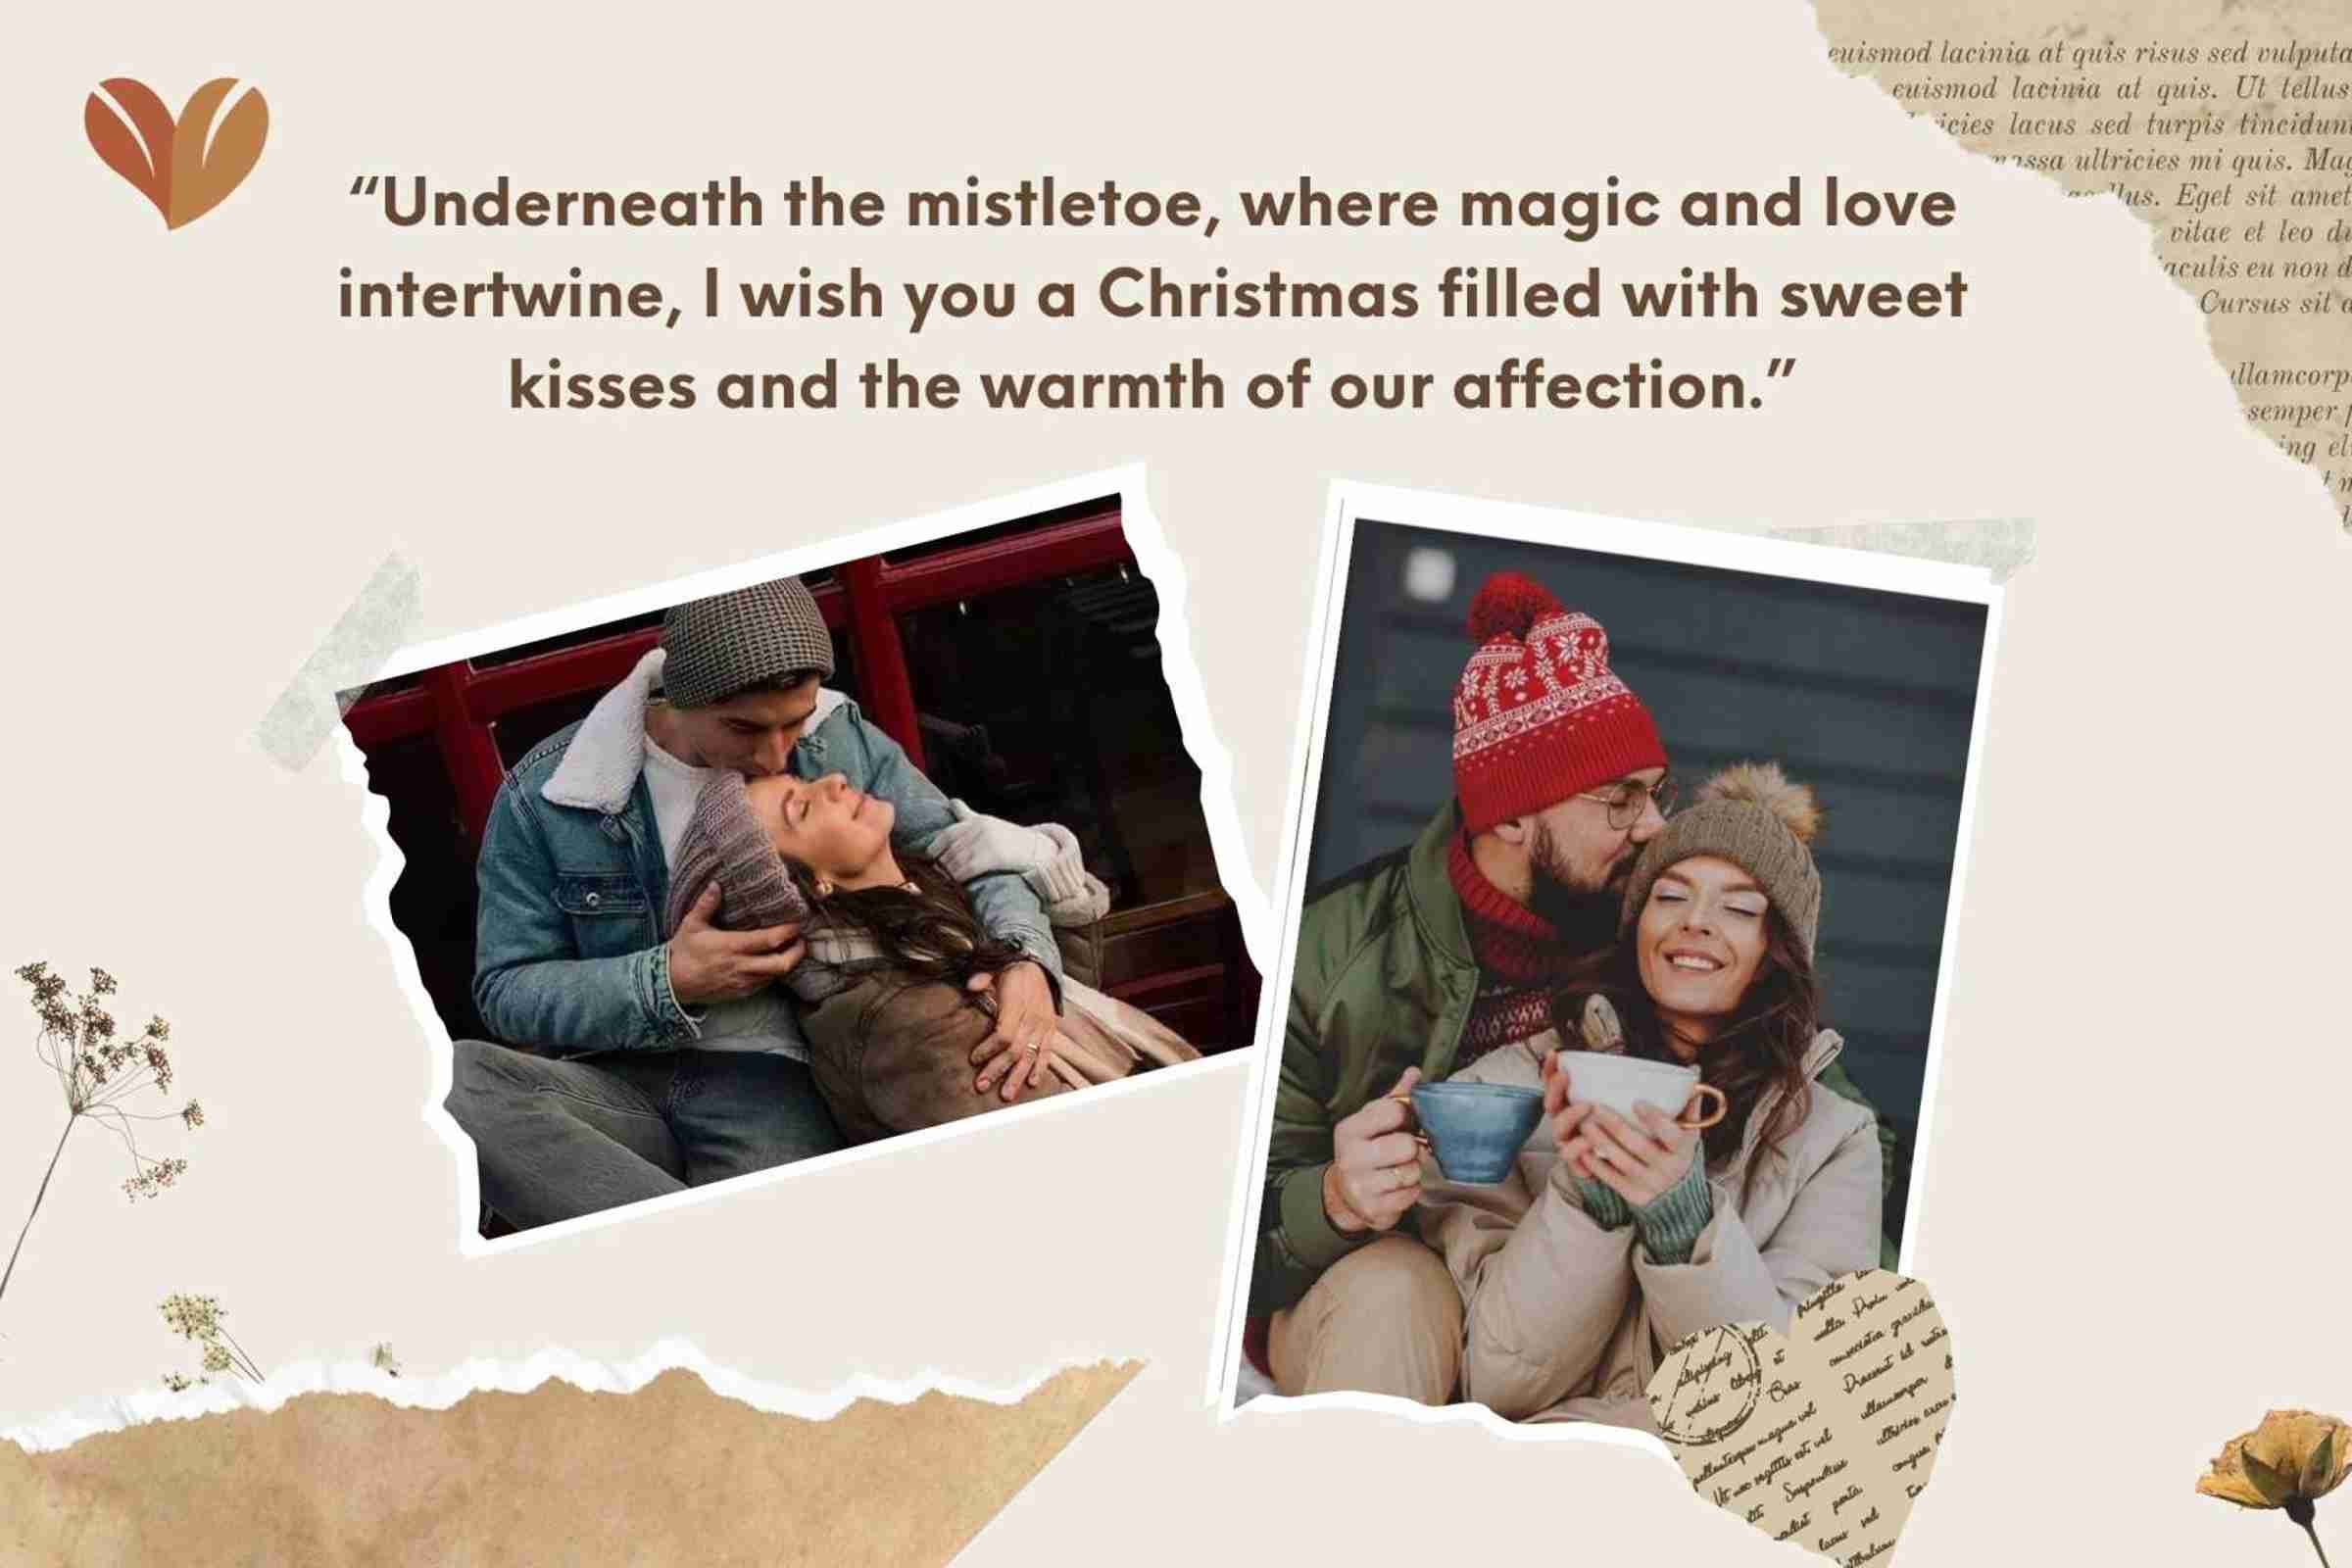 “Underneath the mistletoe, where magic and love intertwine, I wish you a Christmas filled with sweet kisses and the warmth of our affection.”